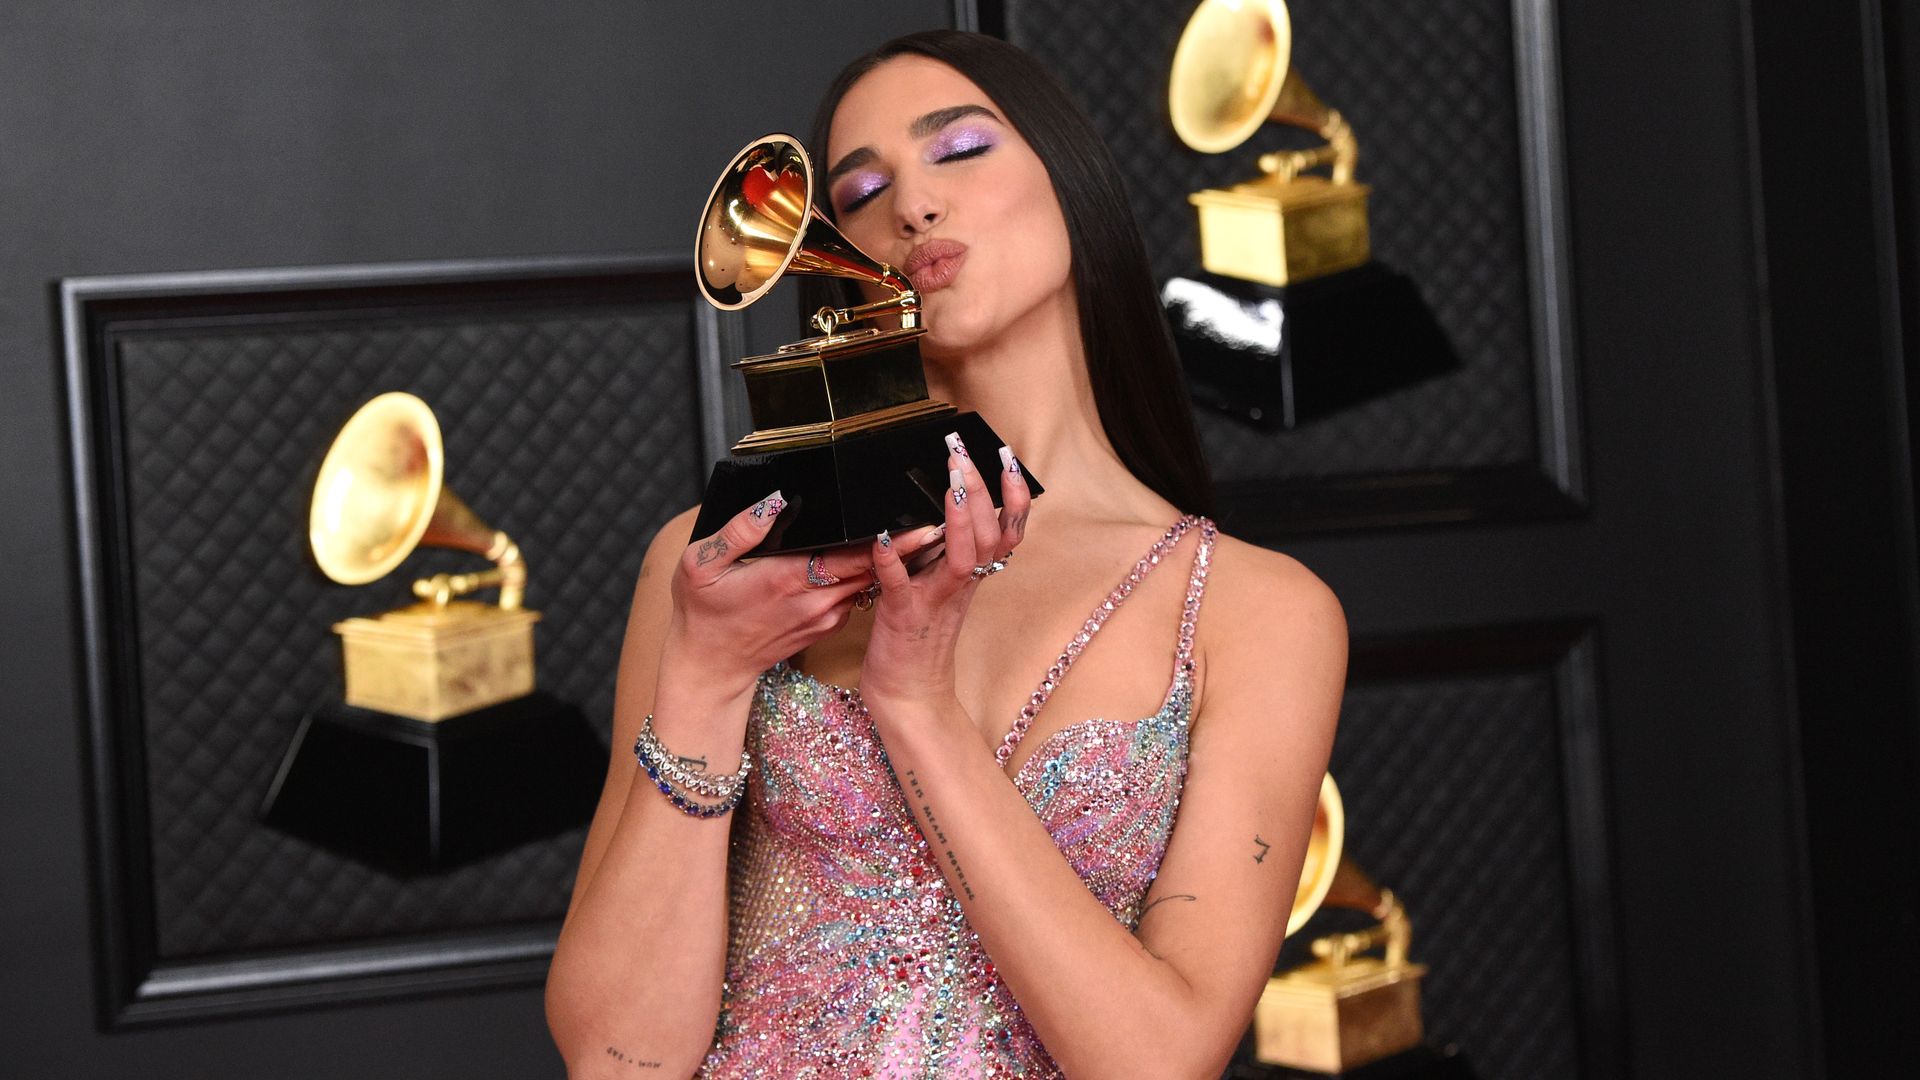 Dua Lipa, winner of Best Pop Vocal Album for Future Nostalgia, poses in the media room during the 63rd Annual GRAMMY Awards at Los Angeles Convention Center on March 14, 2021 in Los Angeles, California